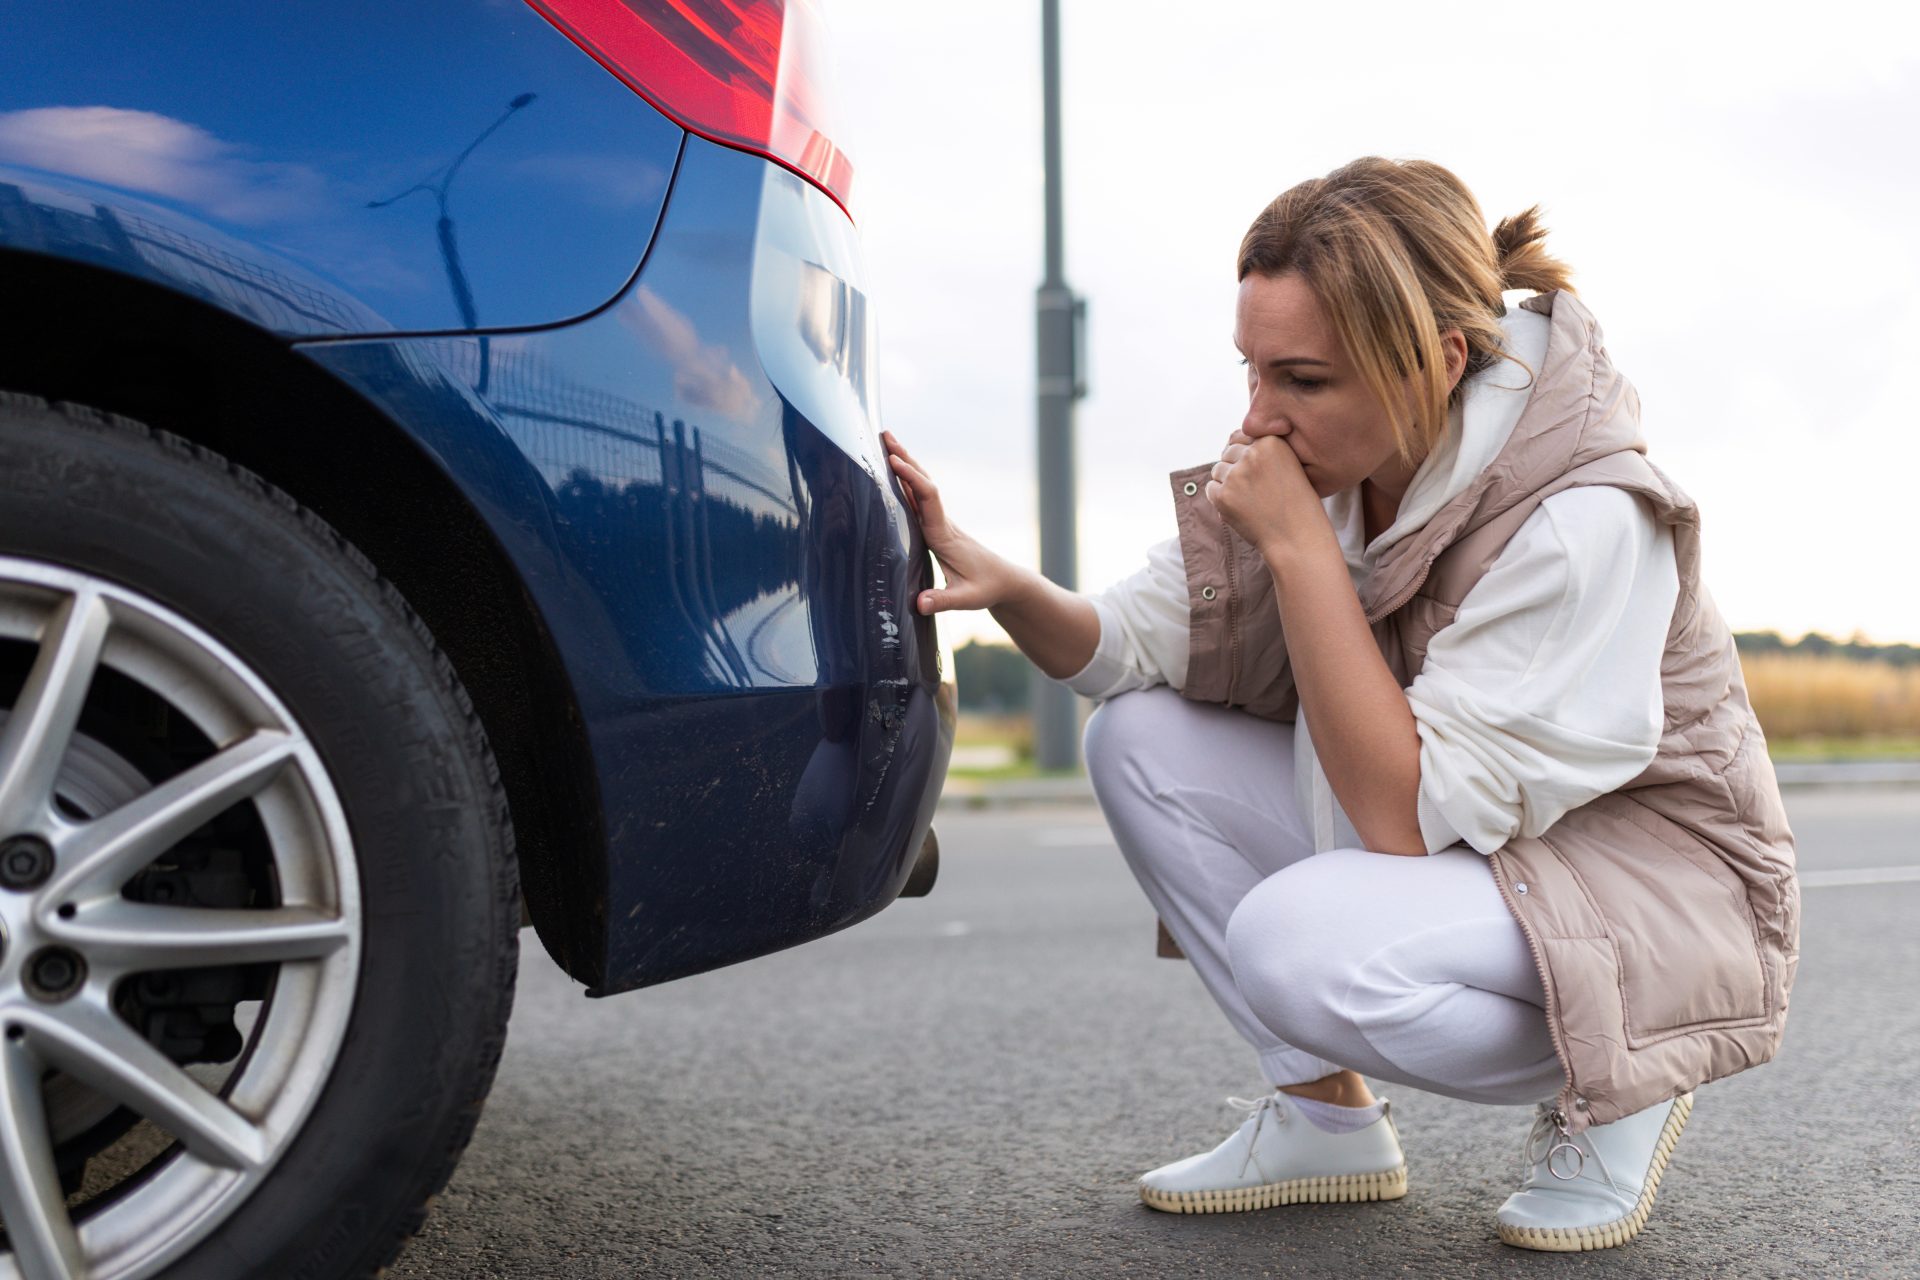 A woman squatting down to inspect the tire of her car.